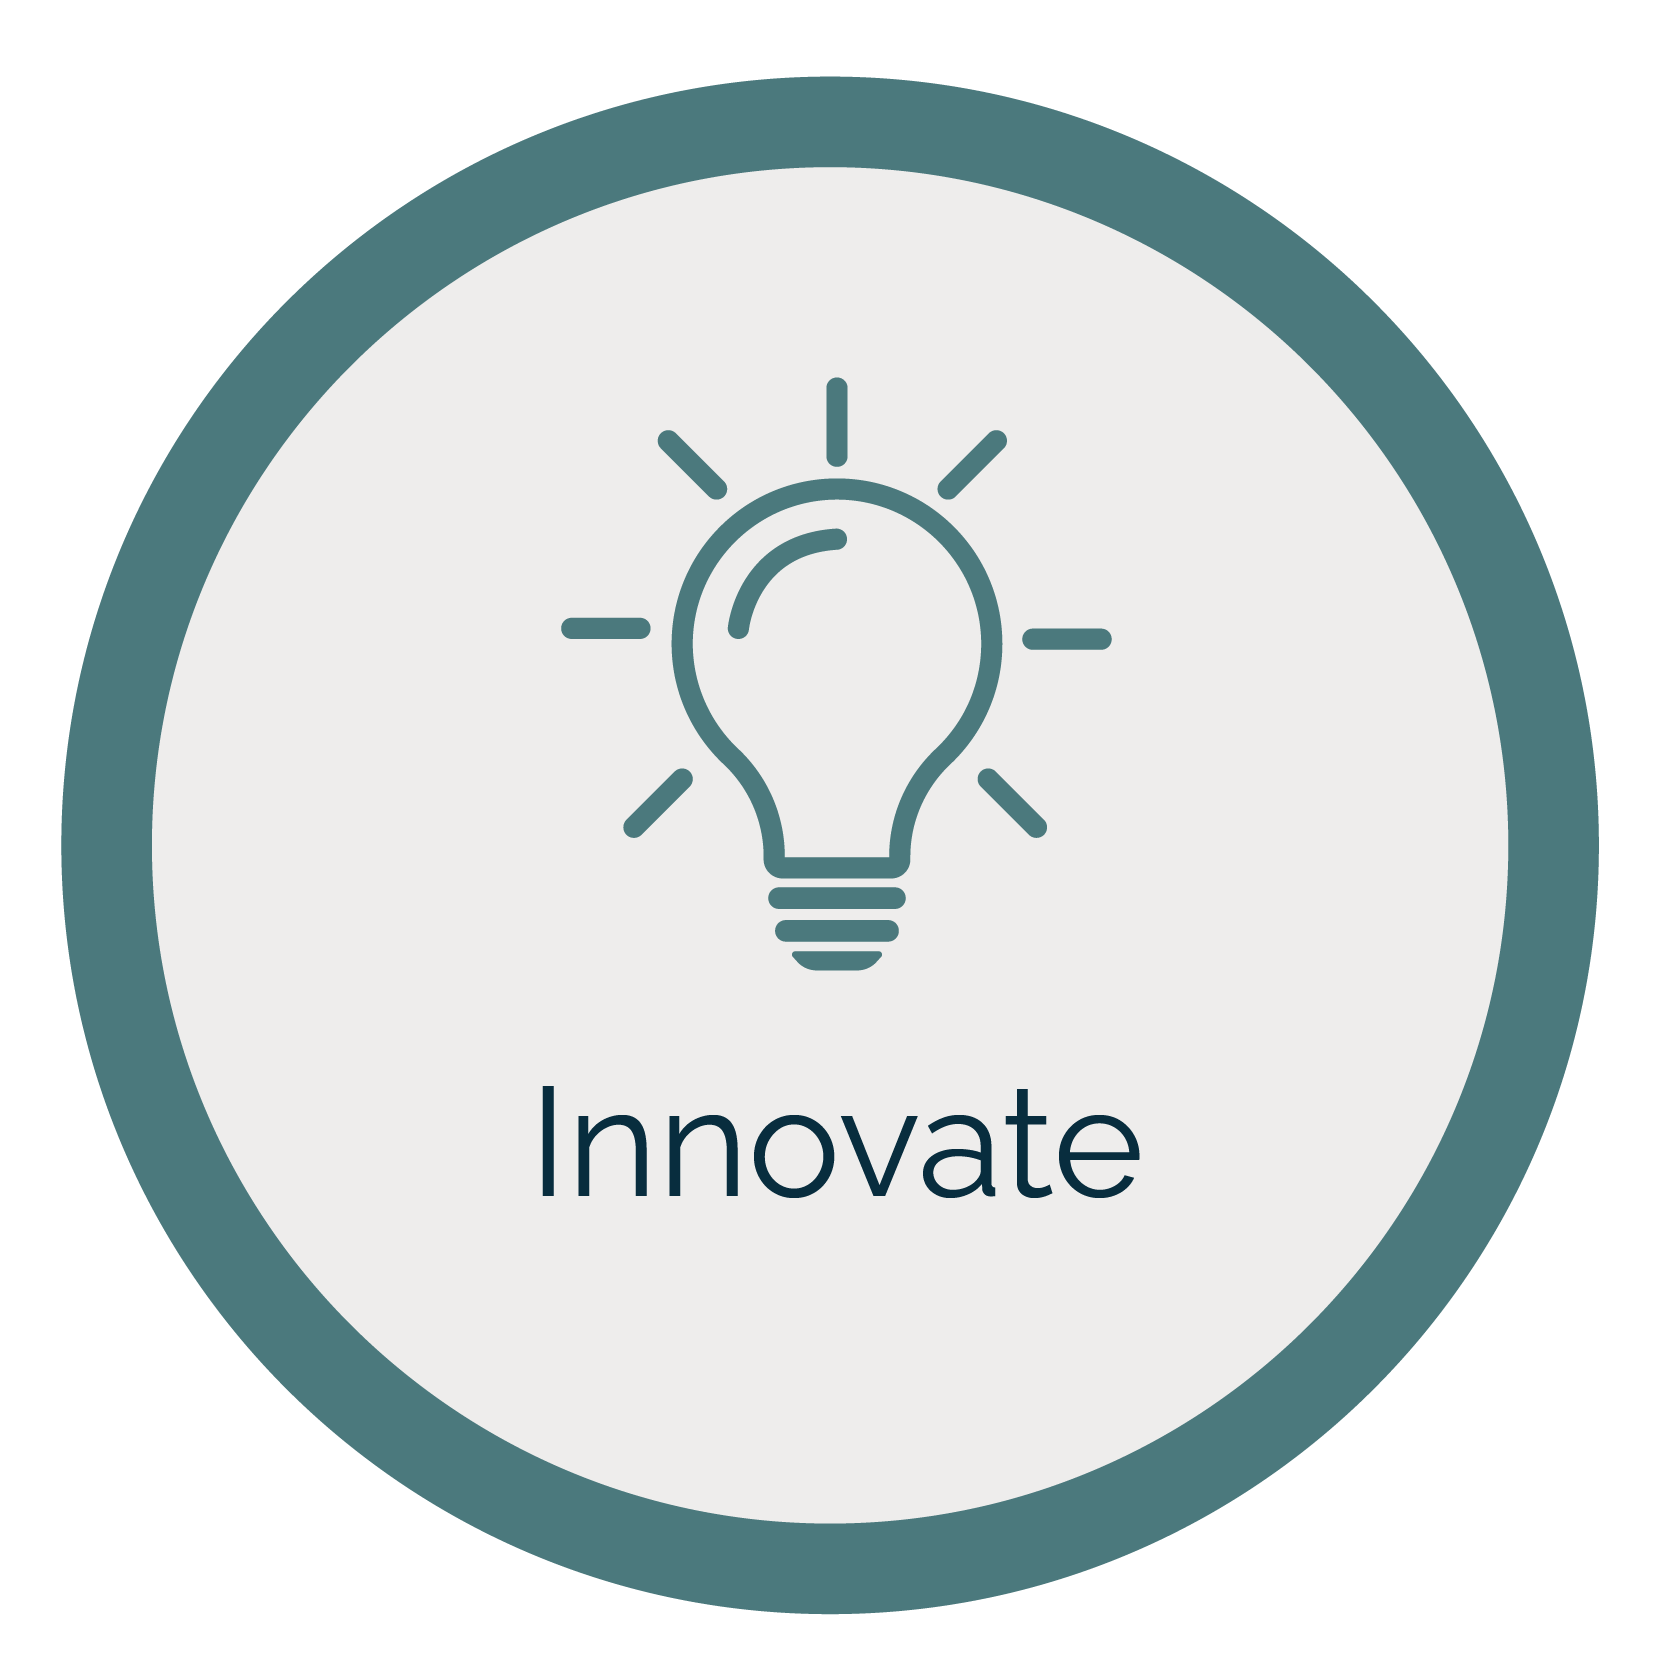 Innovate text with lightbulb icon